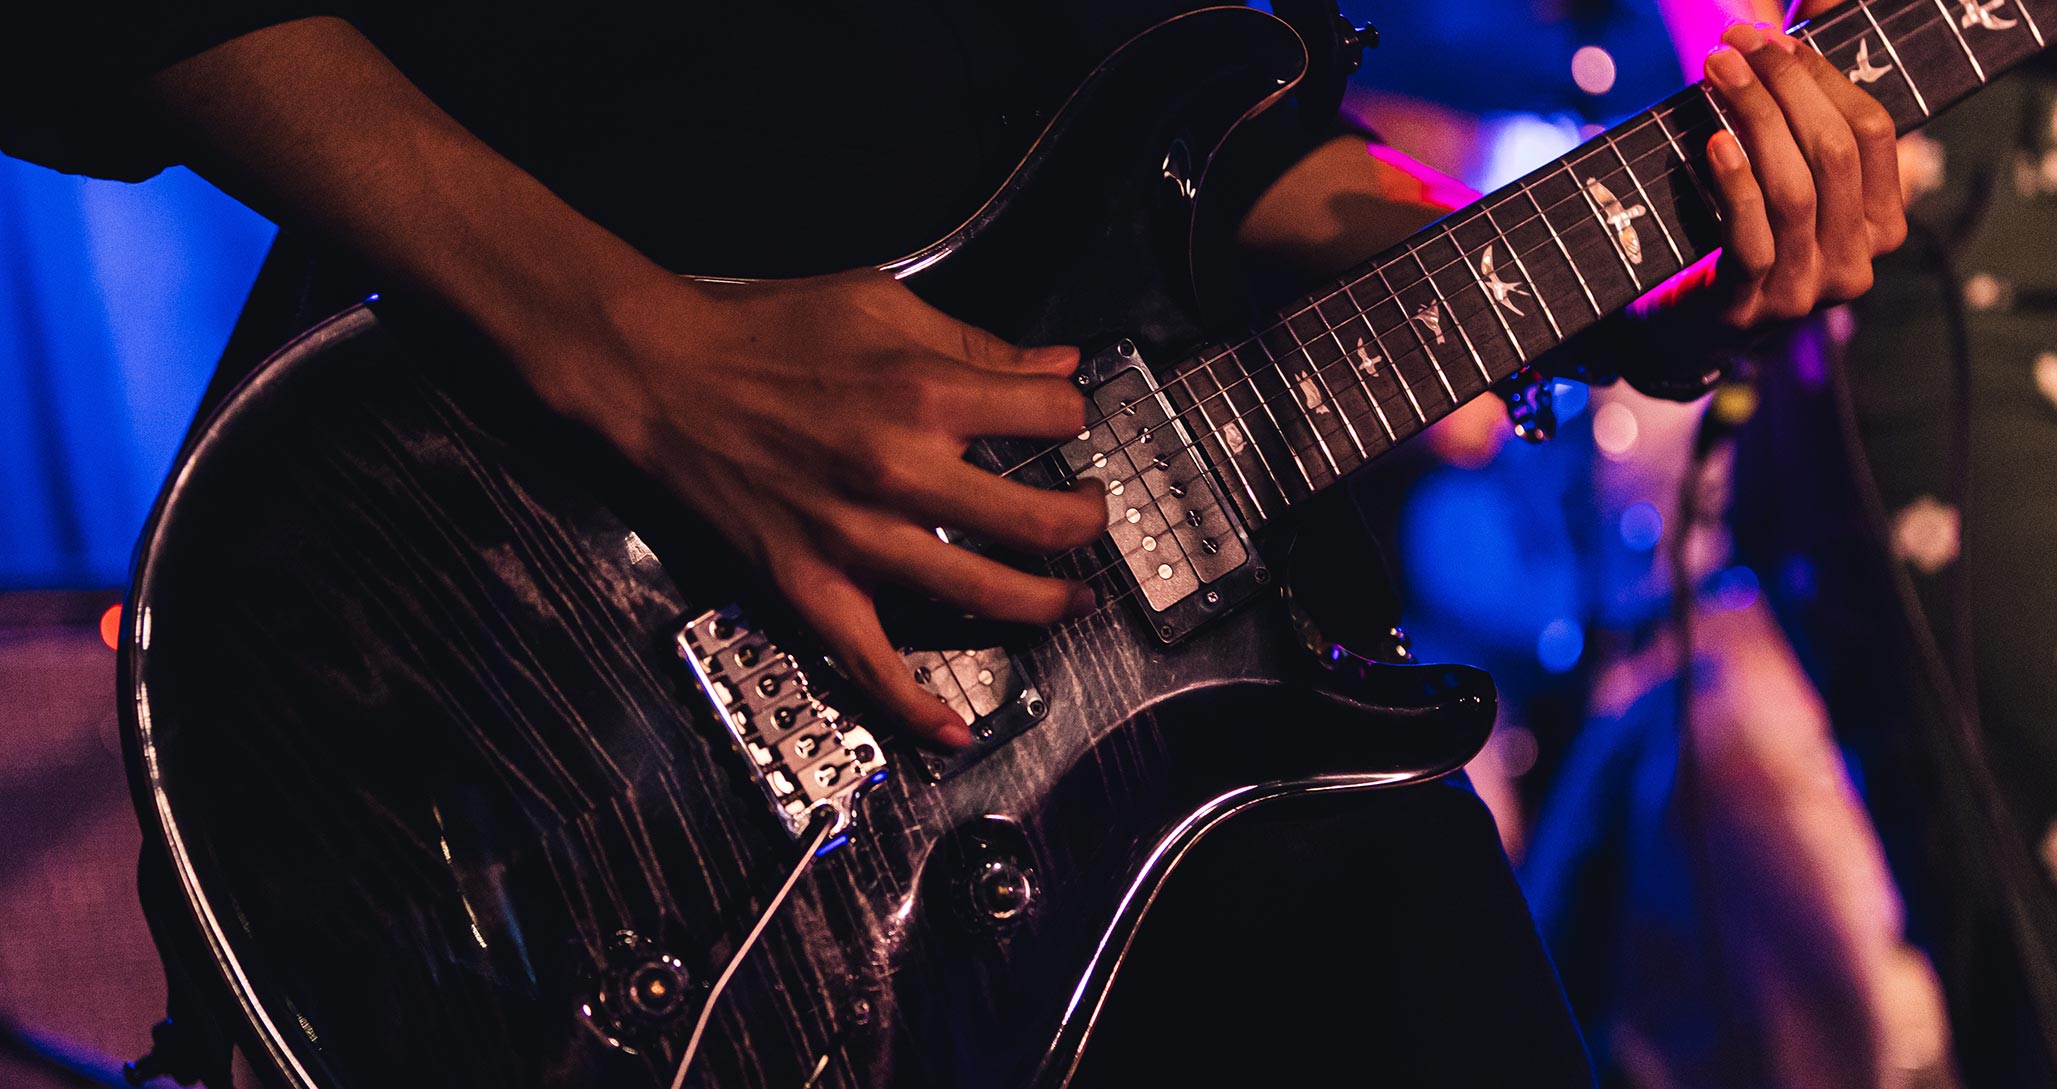 Learning to play multiple instruments can diversify your skills throughout the music industry